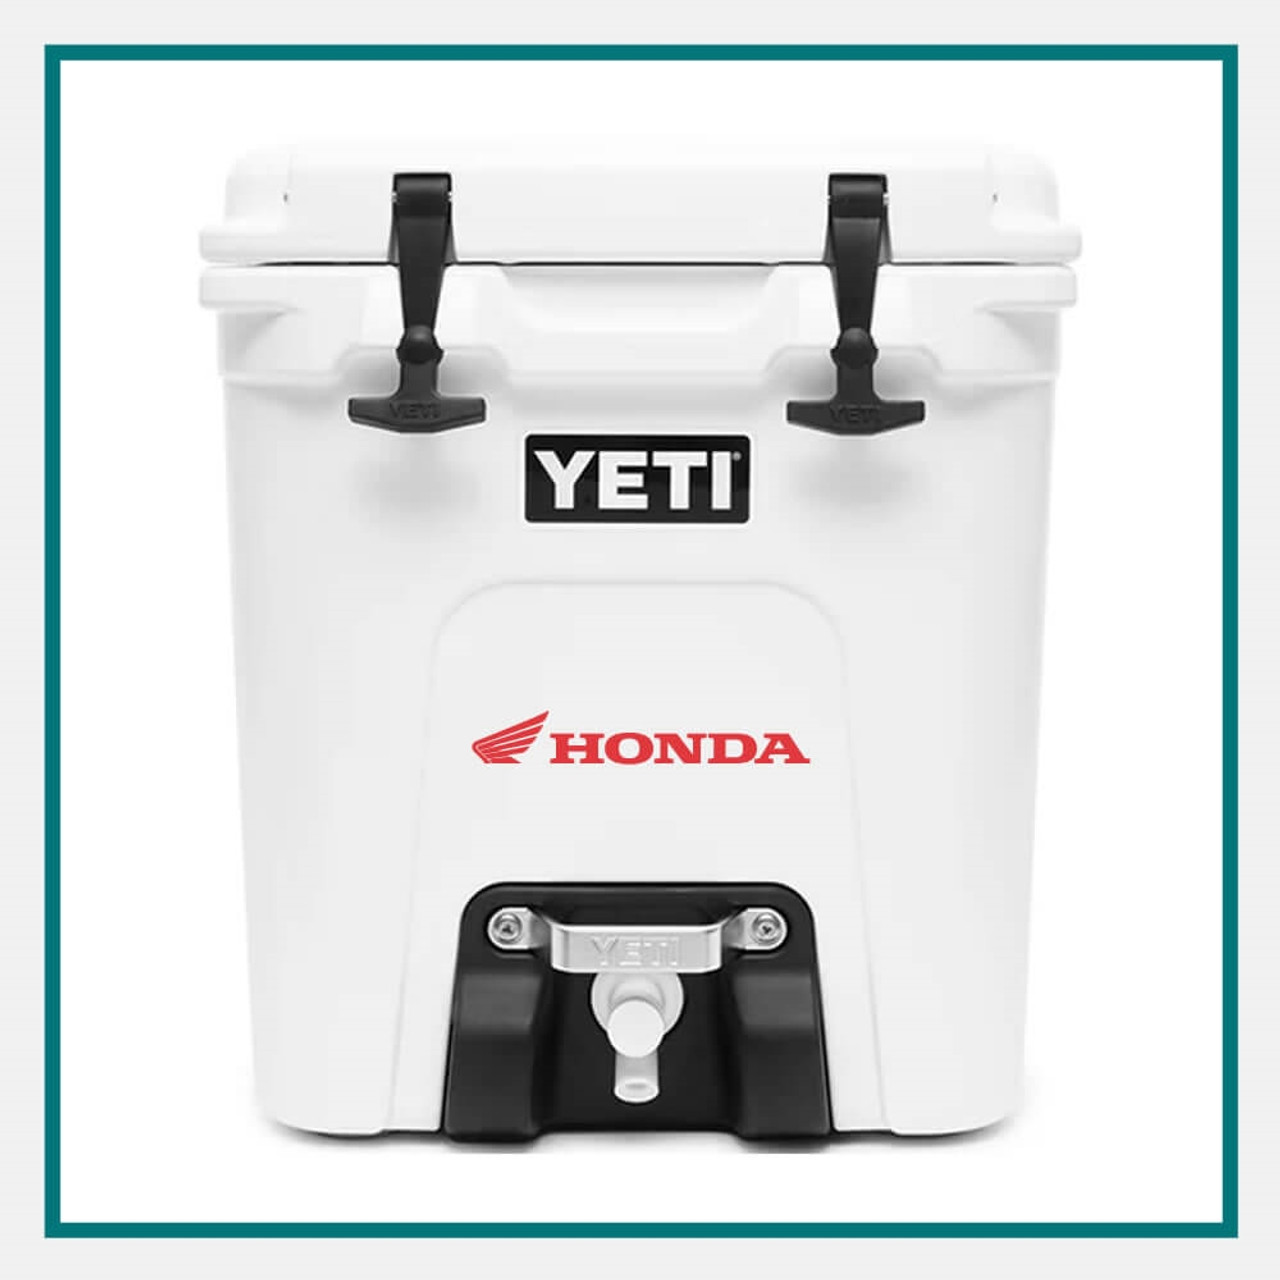 Yeti, Solo Stove and Apple Watch: Best online sales right now